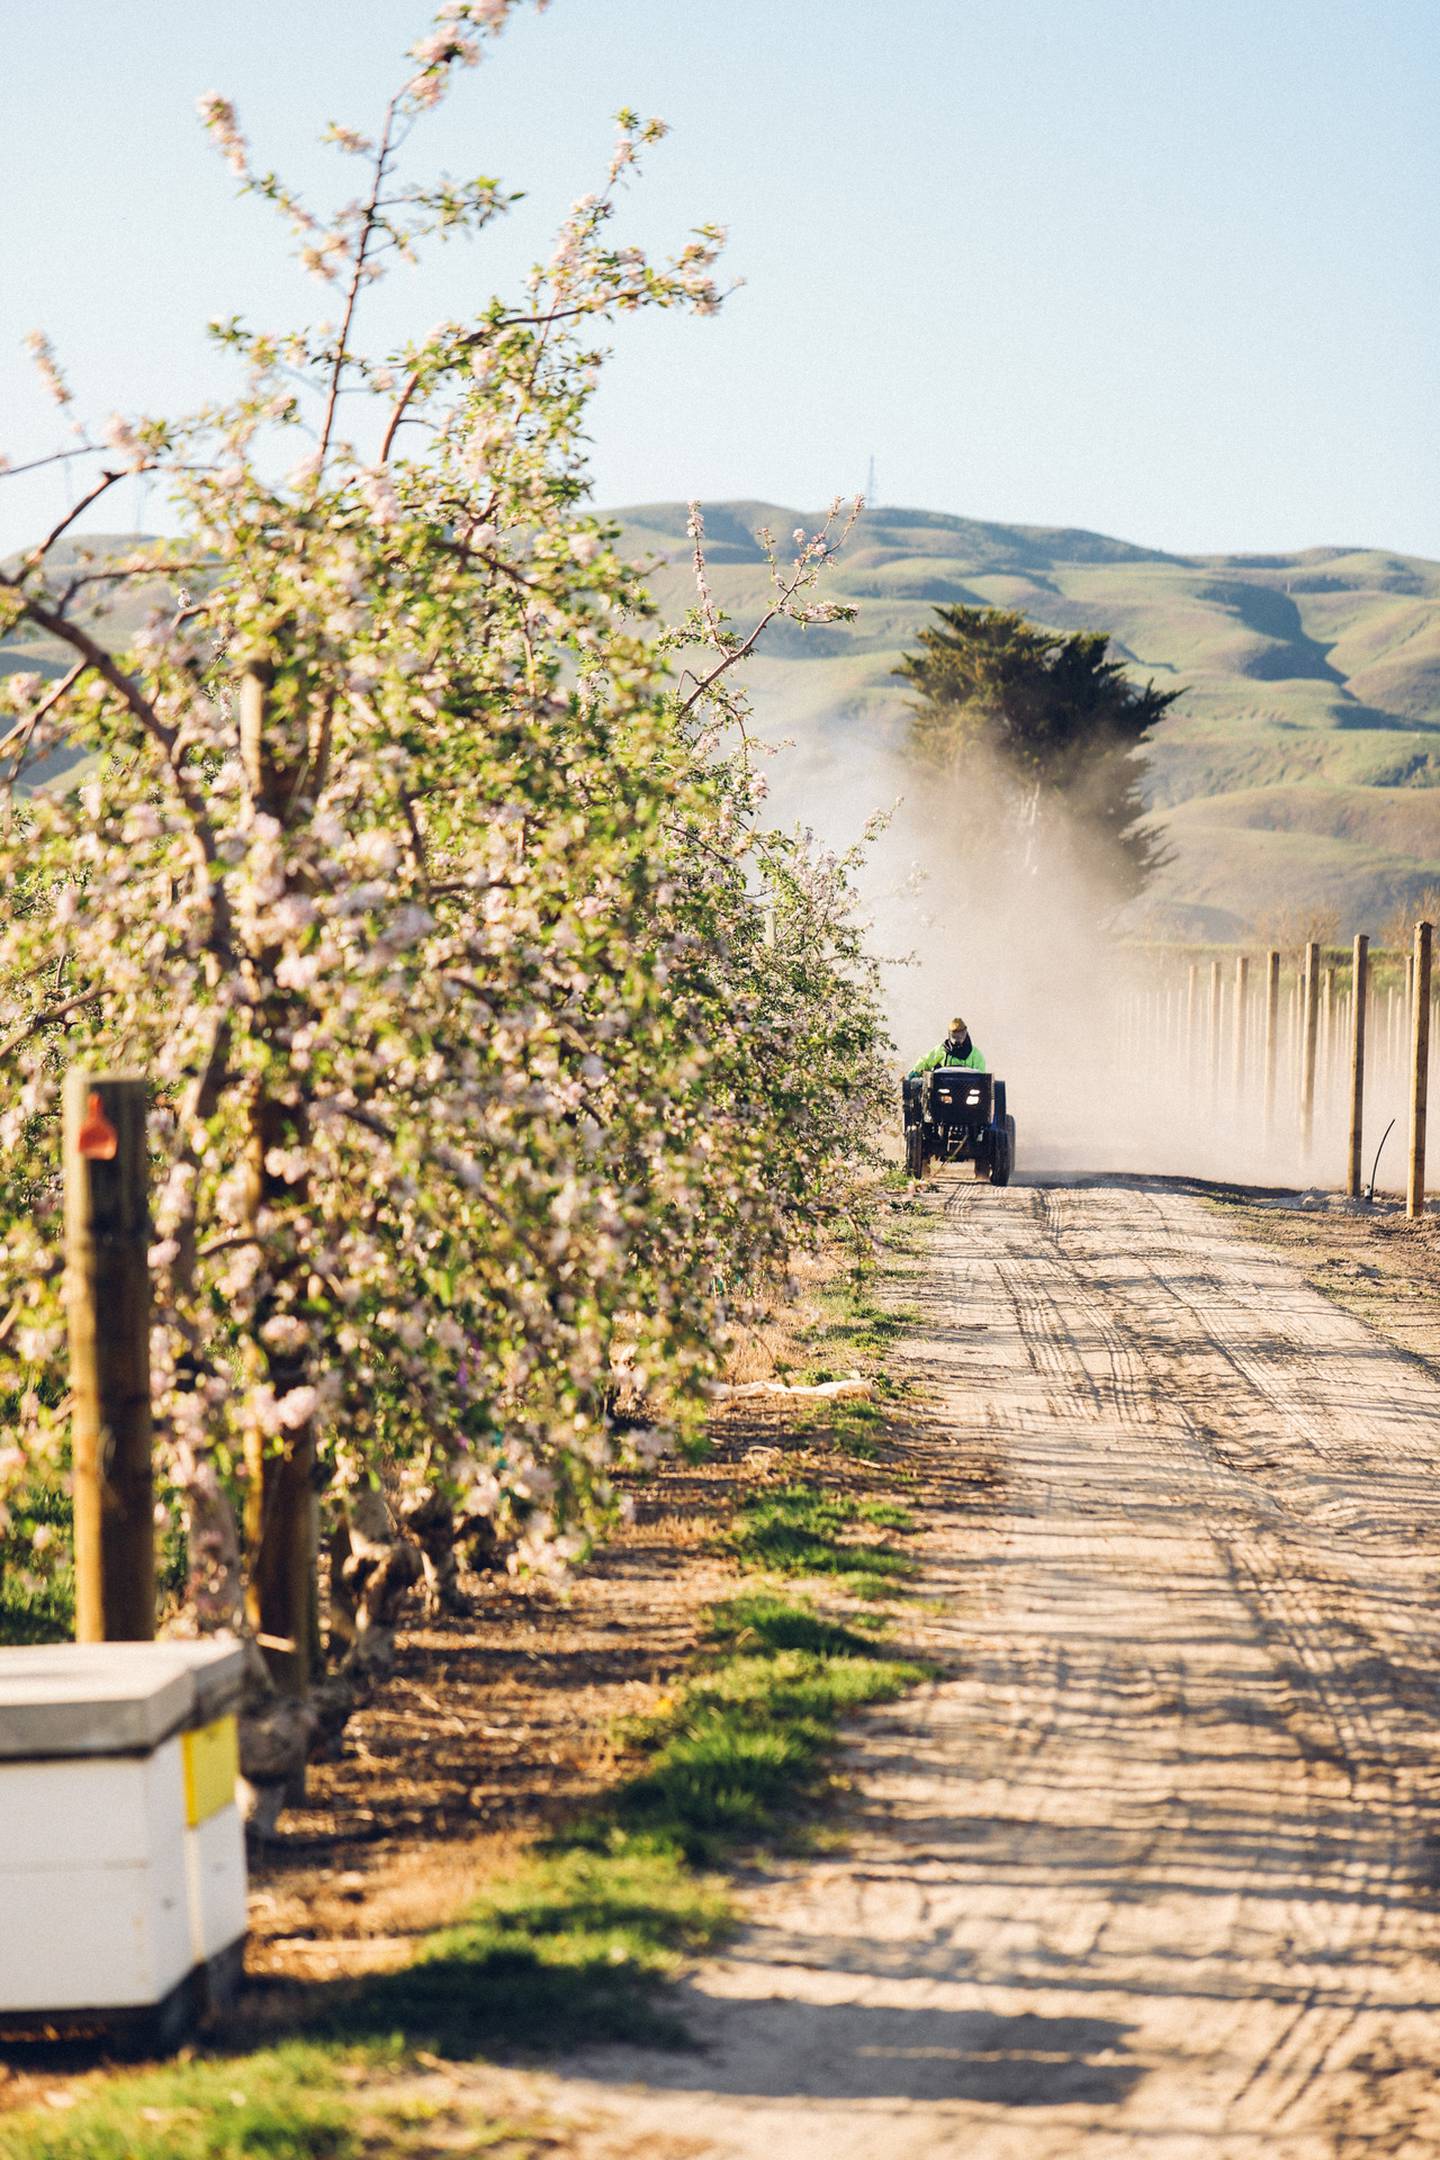 A Rockit apple orchard. Photo / Supplied